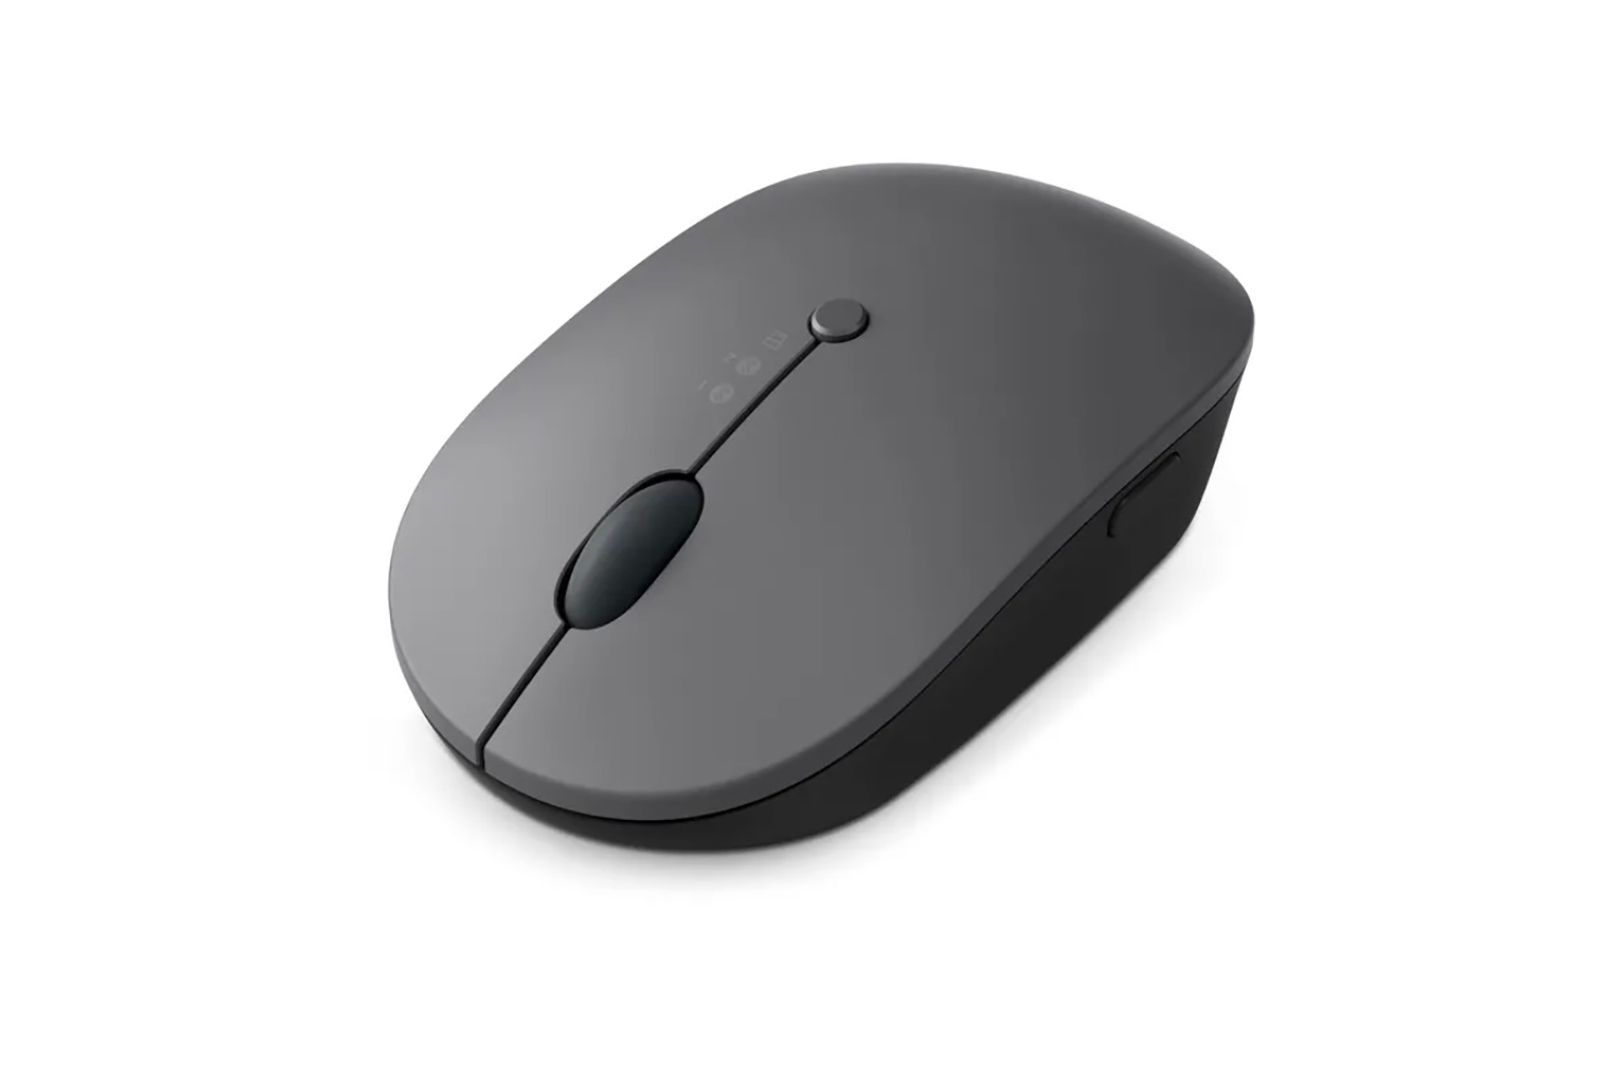 Lenovo's new Go multi-device mouse for travel can wirelessly charge photo 1